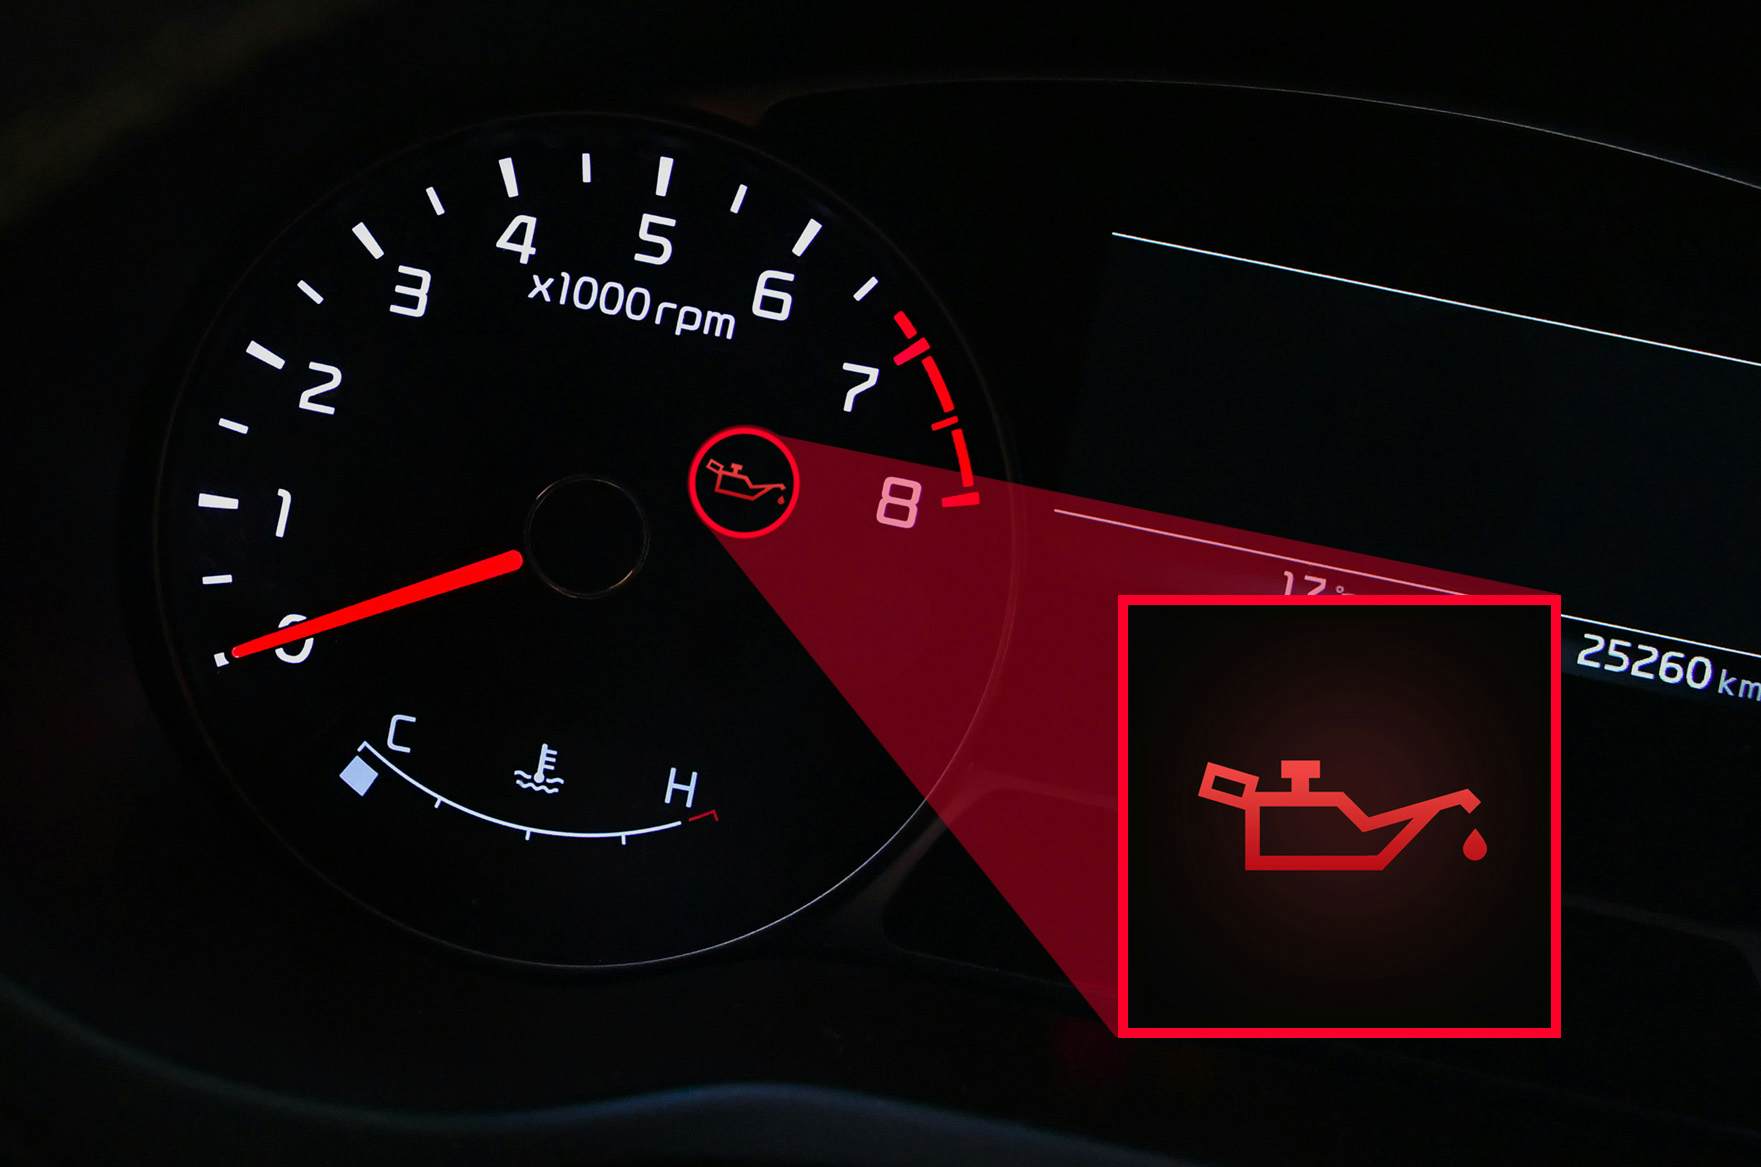 Oil warning light: What problem does it indicate?